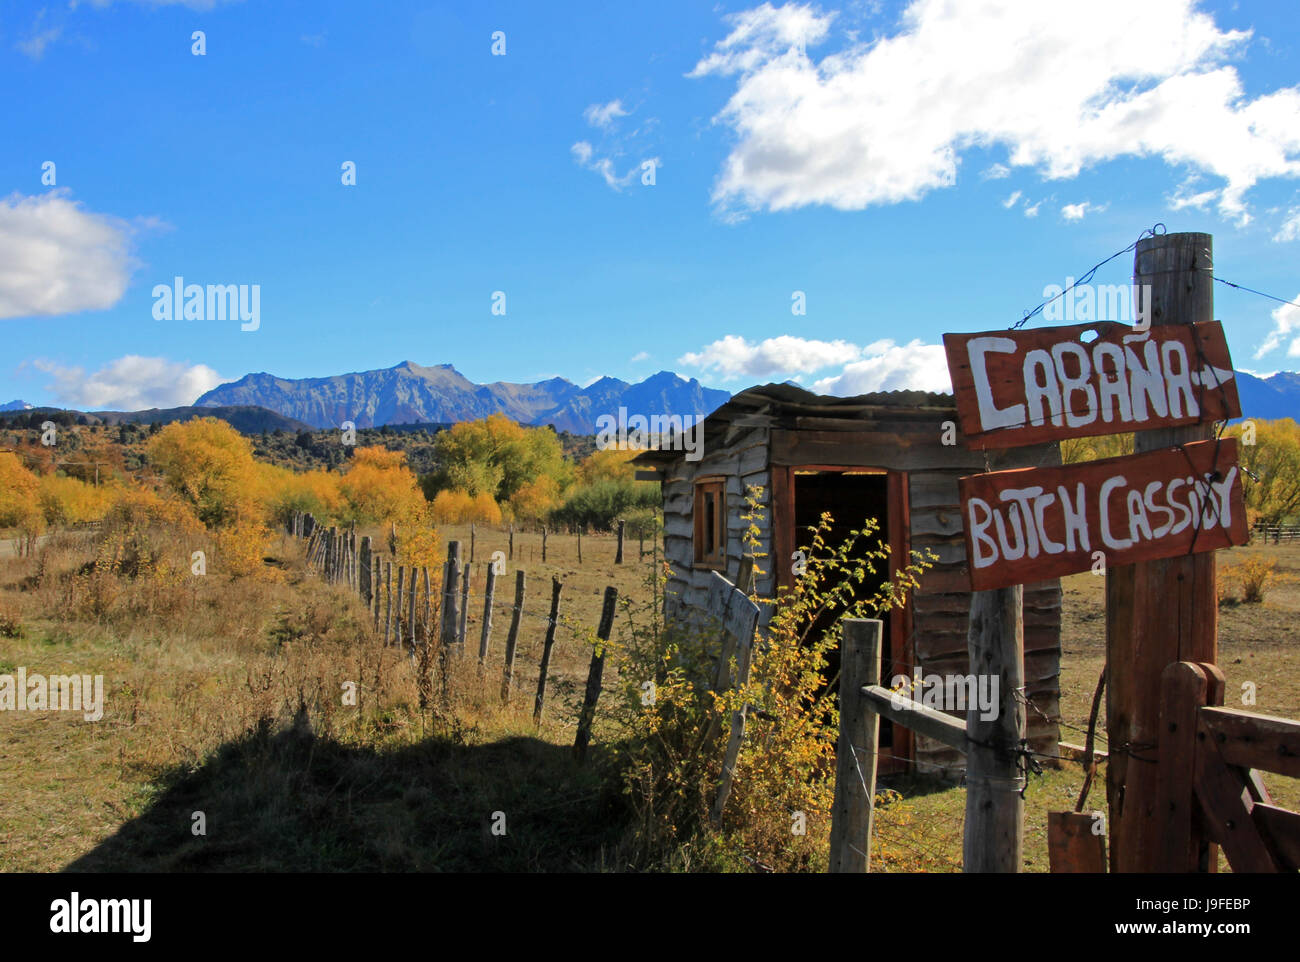 Sign to Butch Cassidy and Sundance Kid House, Cholila, Argentina Stock Photo